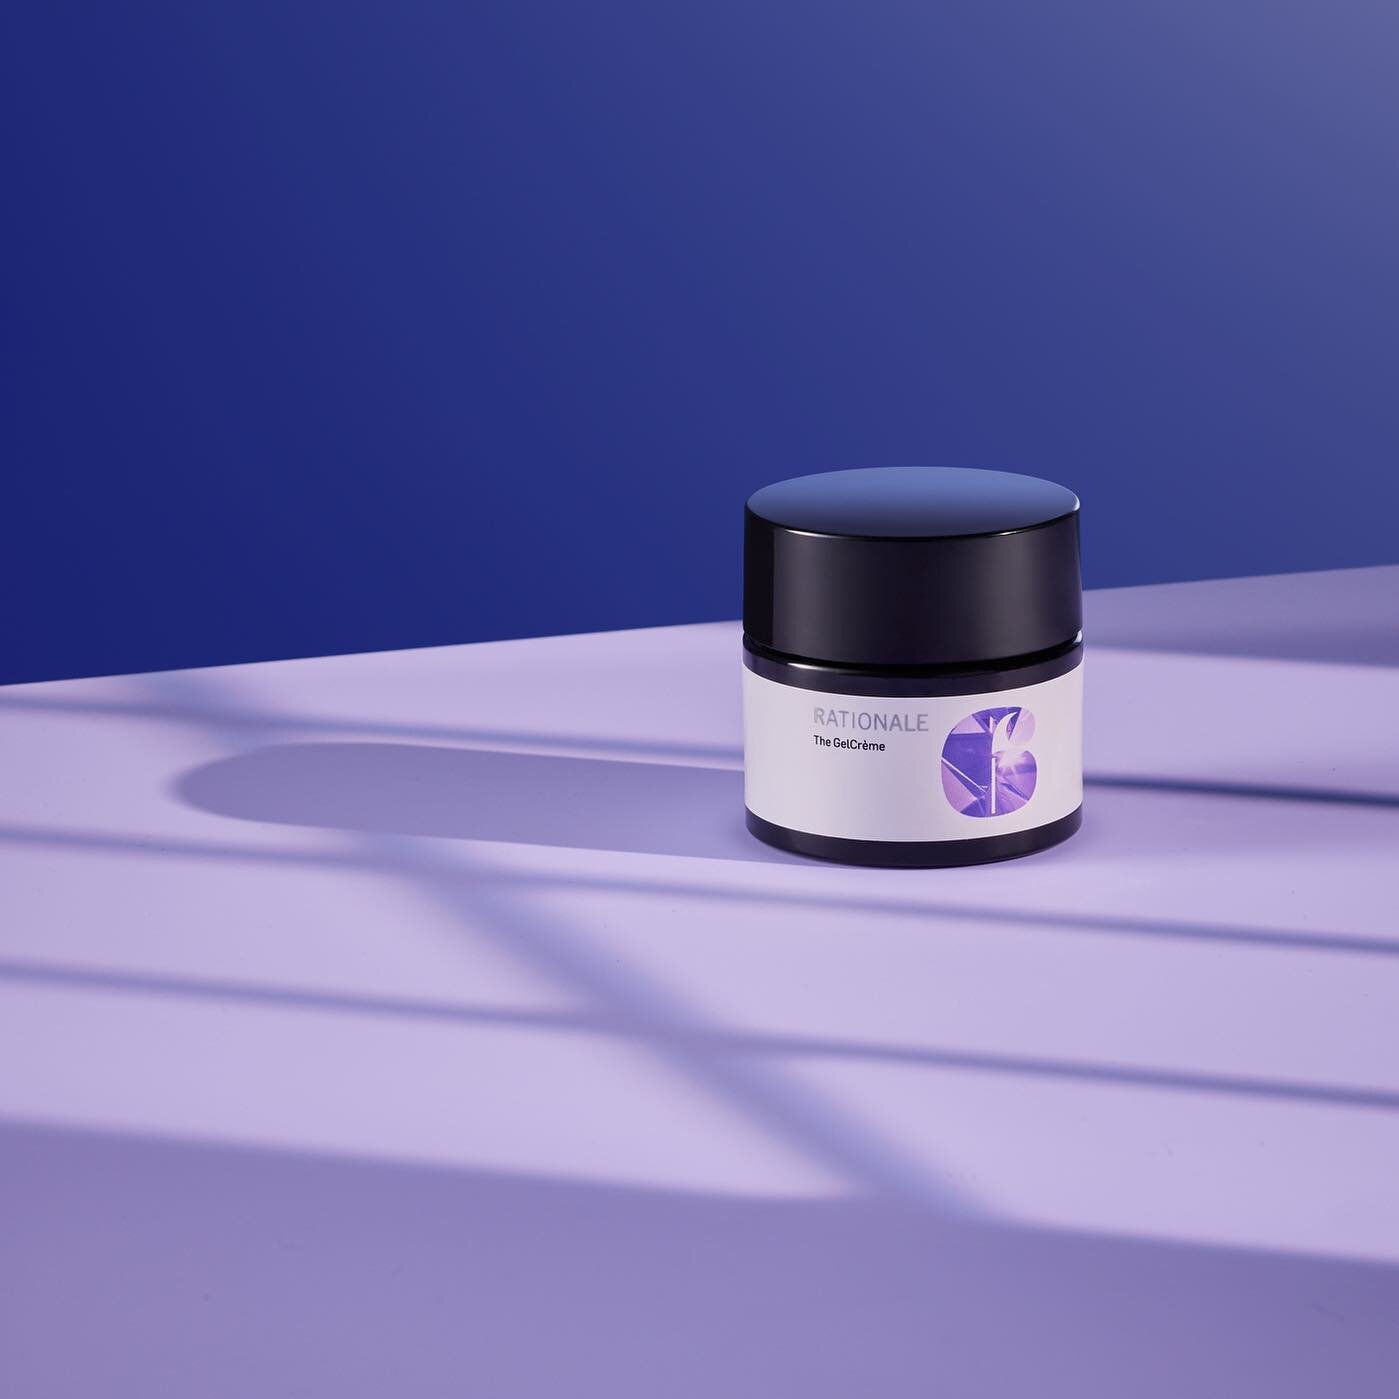 Wake refreshed and more luminous with #6 The GelCr&egrave;me from @rationale. ⁠
⁠
Formulated for skin that does not easily tolerate topical Retinoids (Vitamin A), a gentle botanical alternative known as Bakuchiol renews radiance overnight by enhancin